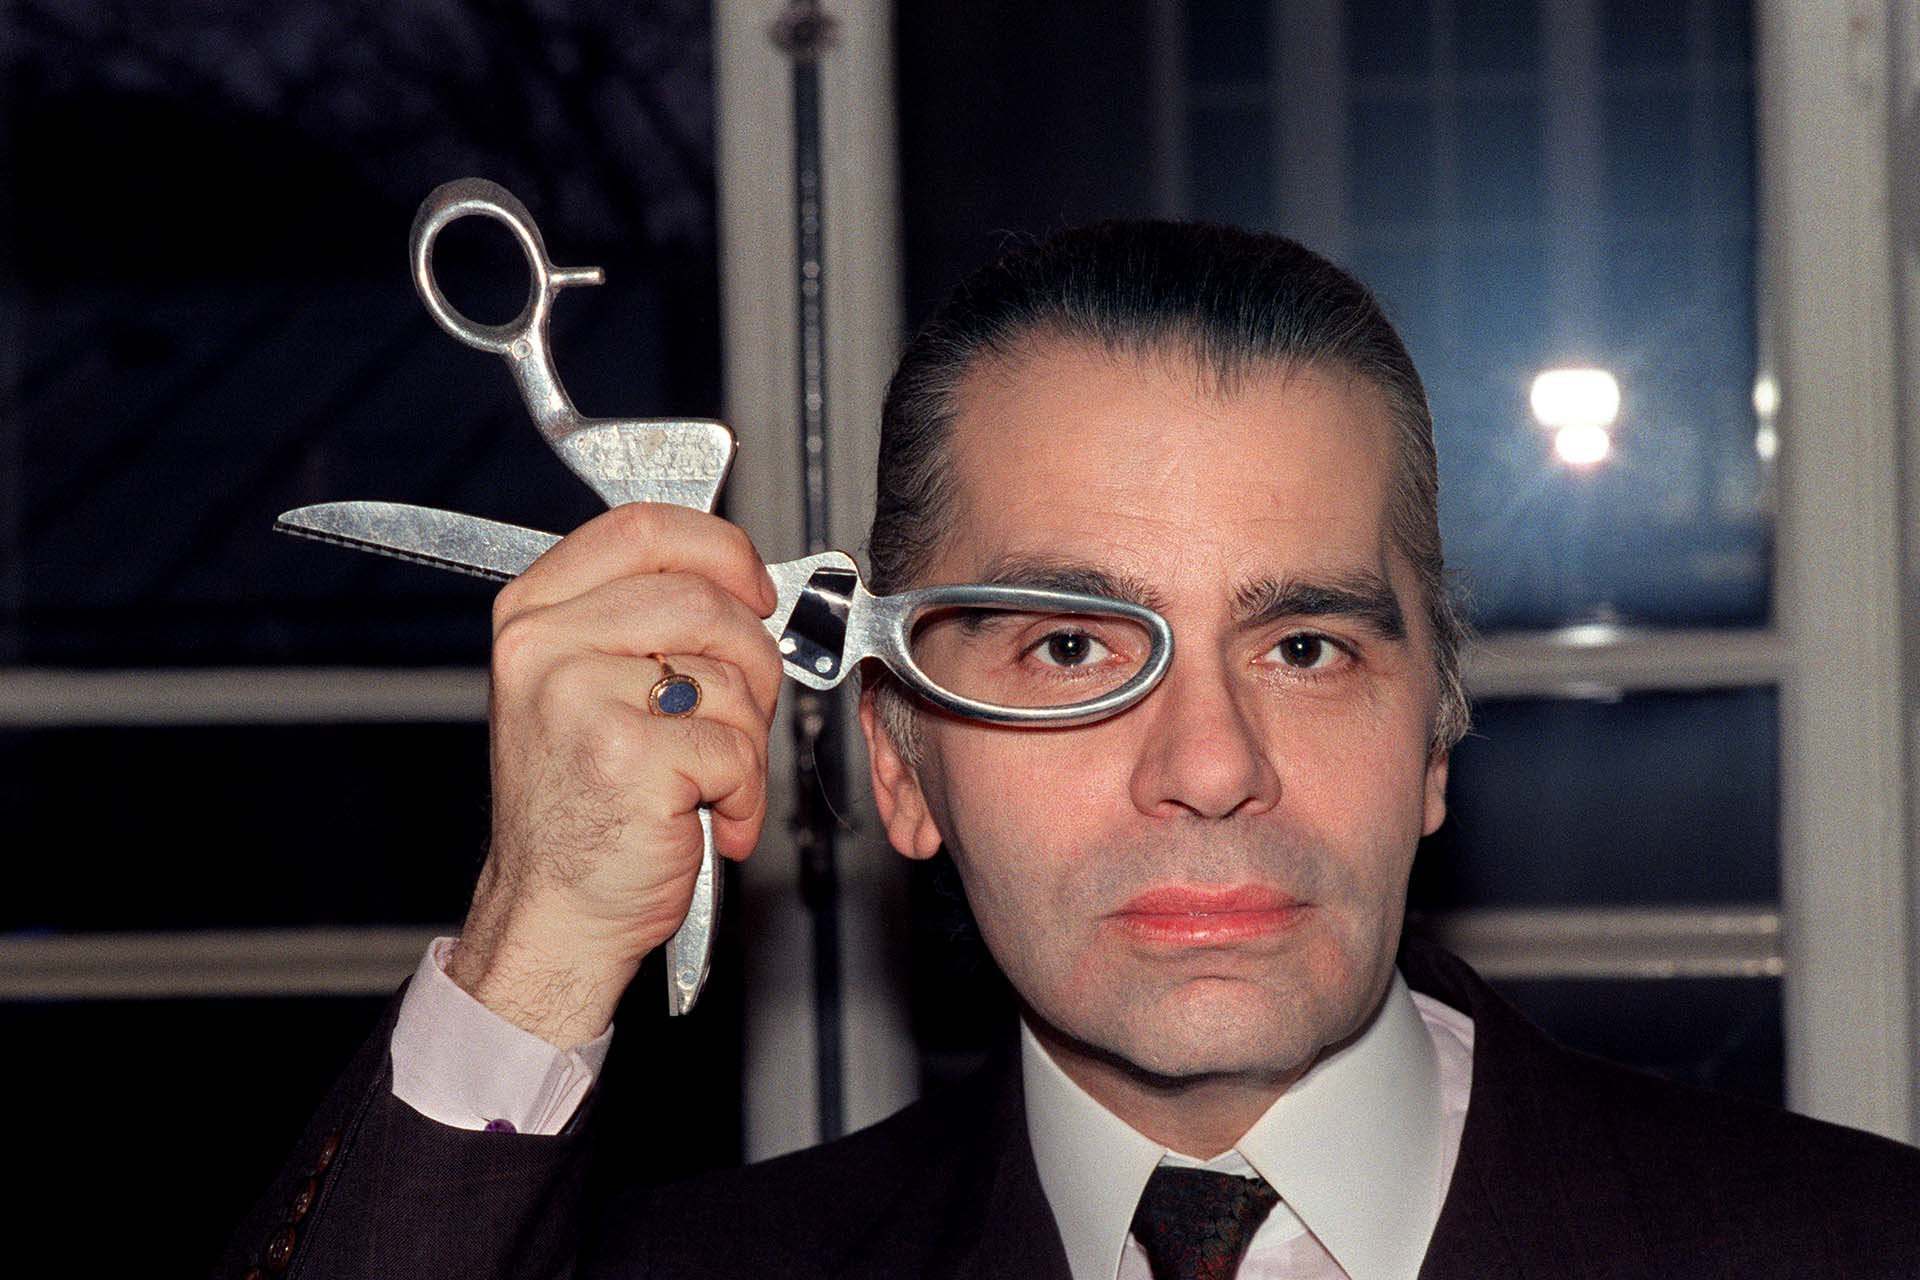 Kaiser Karl: 12 moments that made Lagerfeld a legend, Karl Lagerfeld